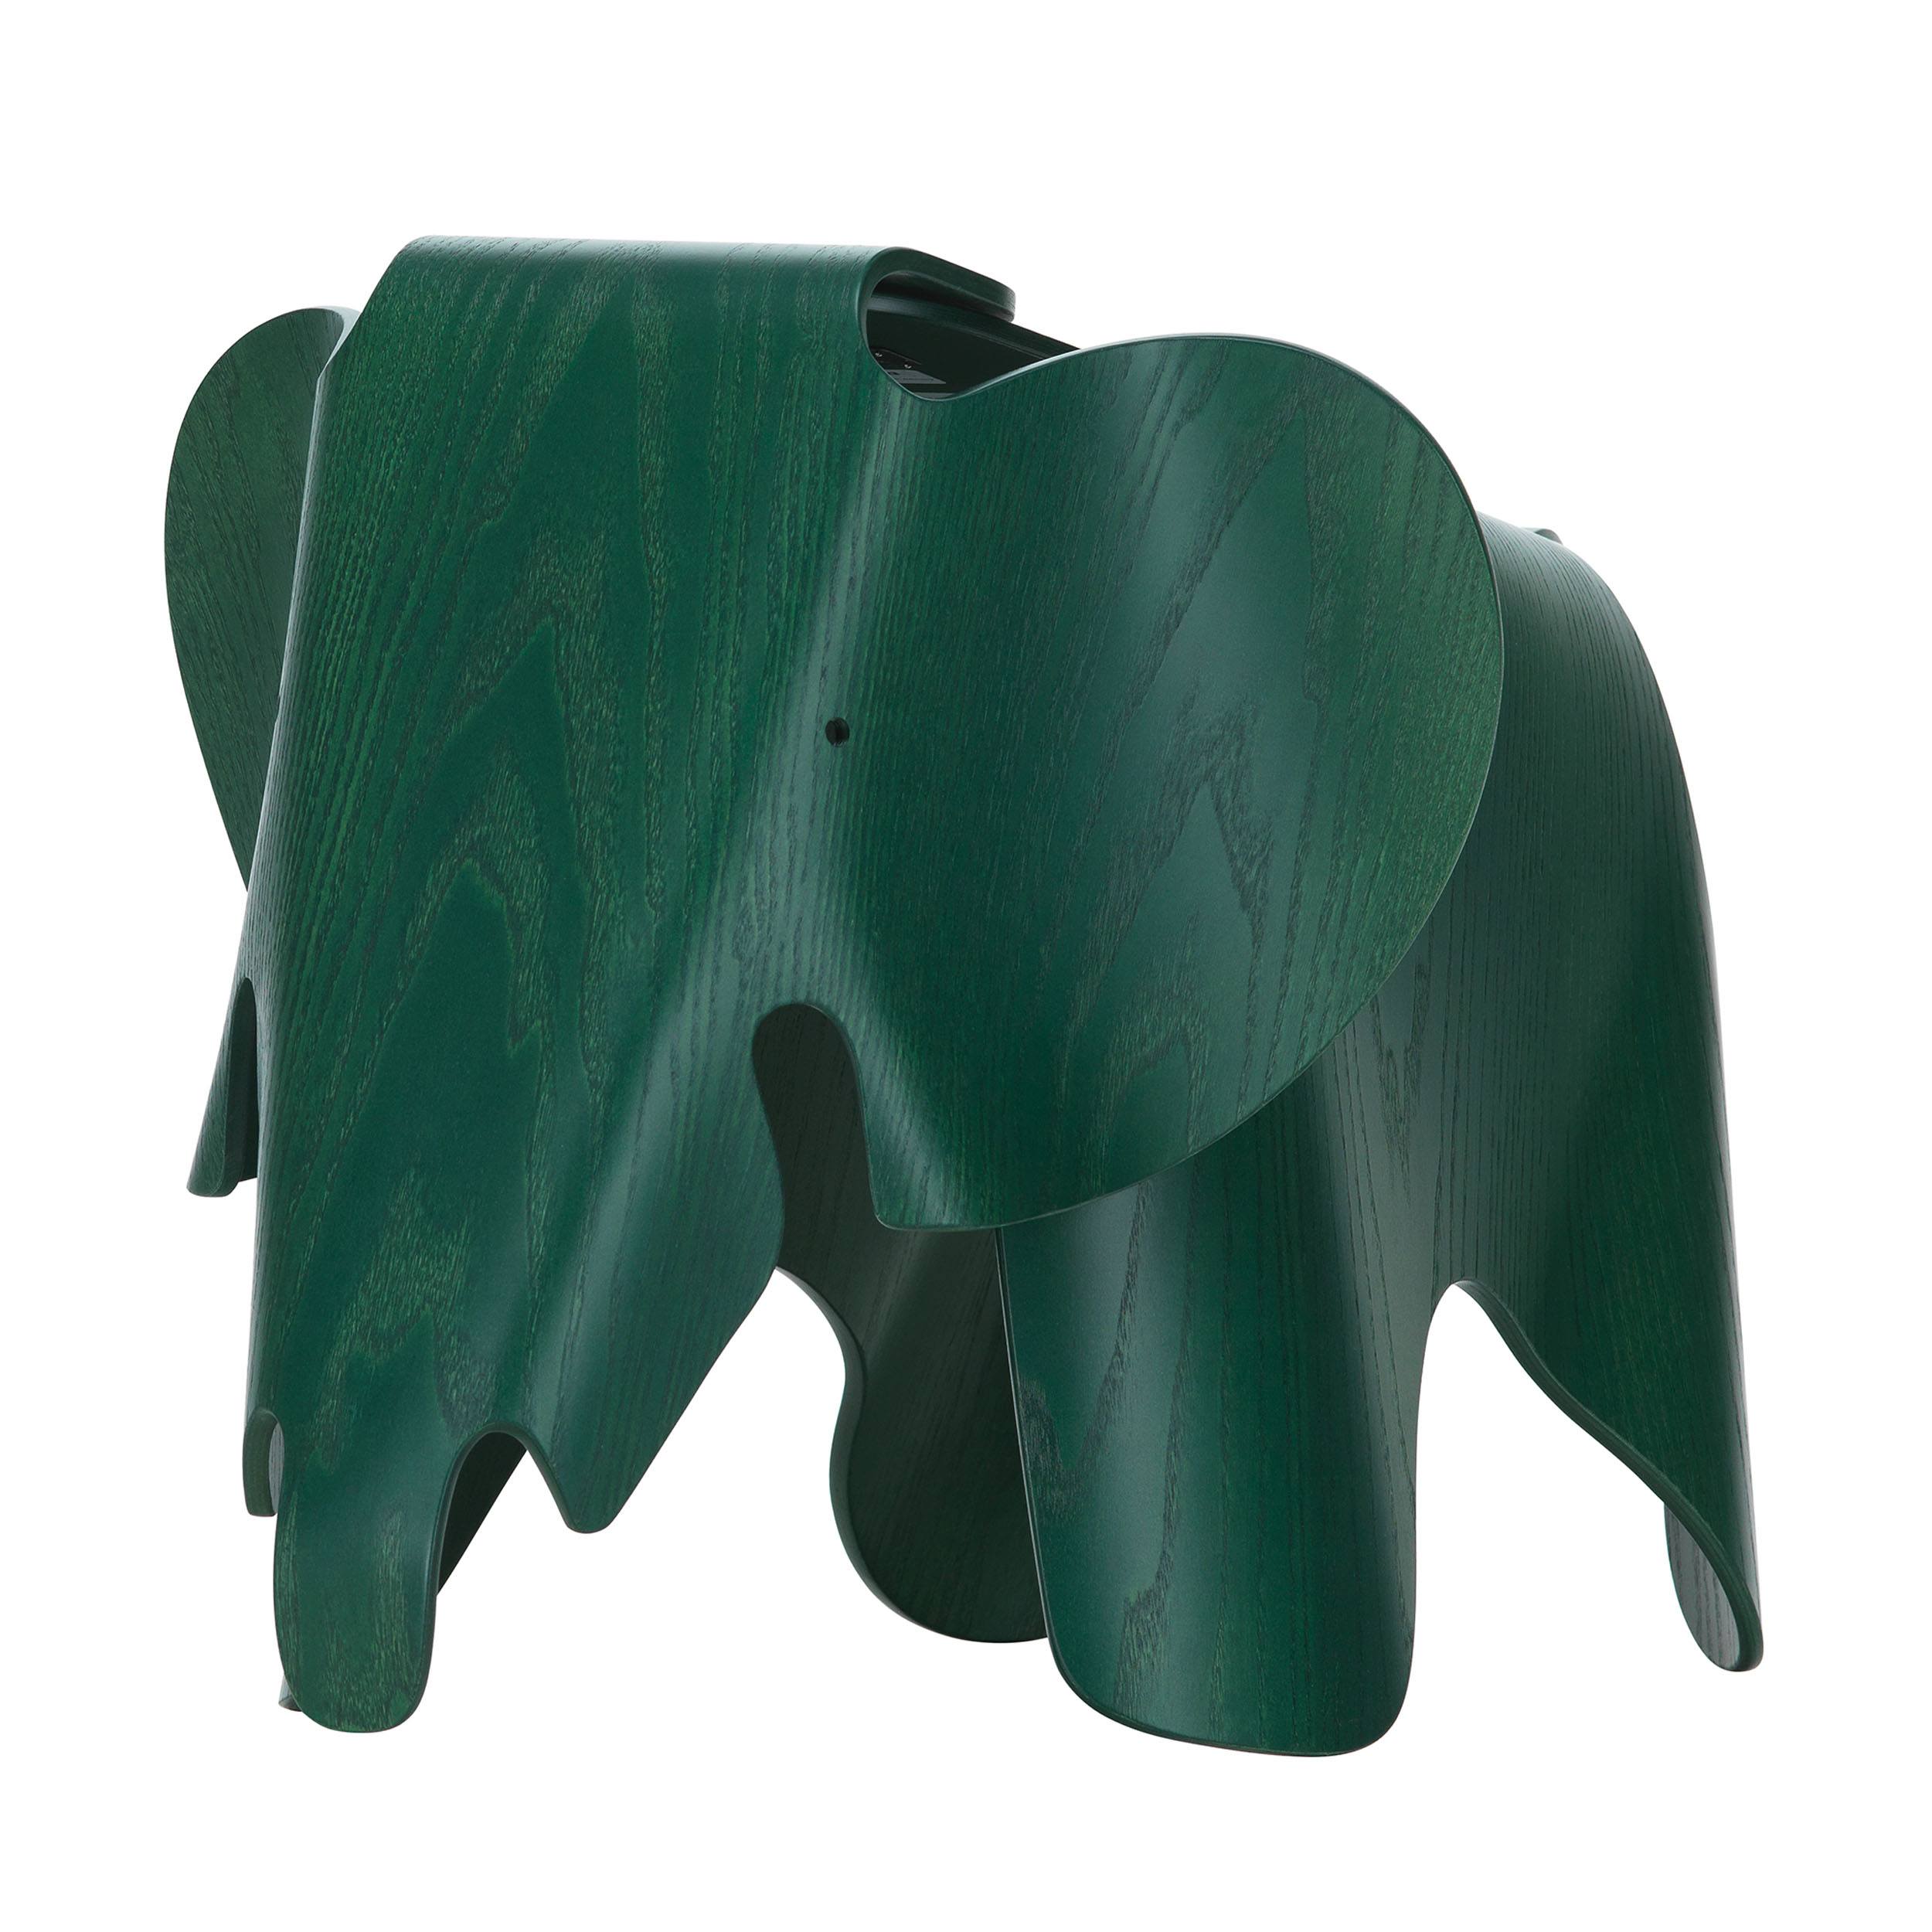 Eames Elephant Plywood Special Collection Hocker